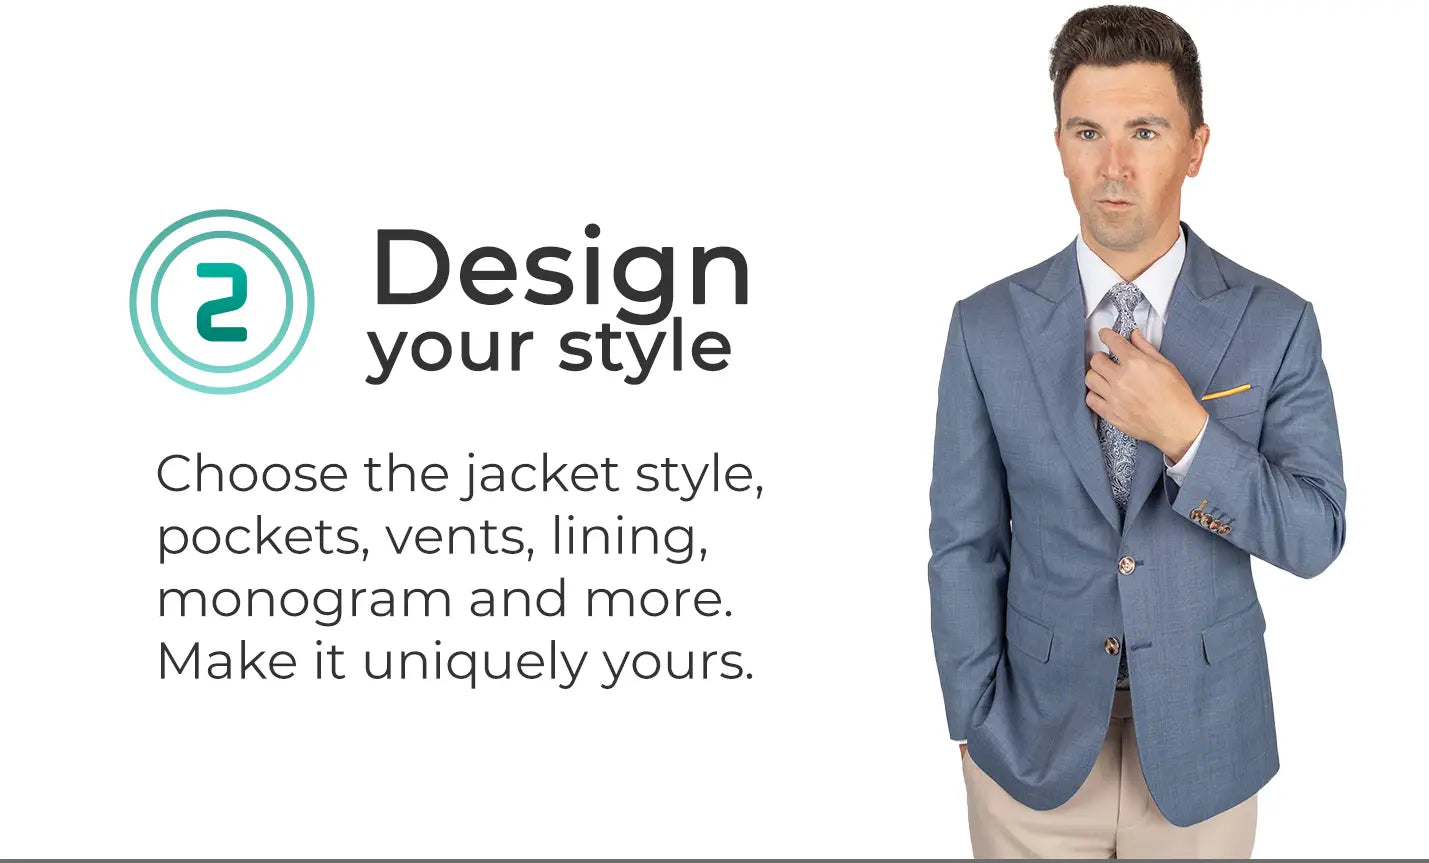 Design your style. Choose the jacket style, pockets, vents, lining, monogram and more. Make it uniquely yours.